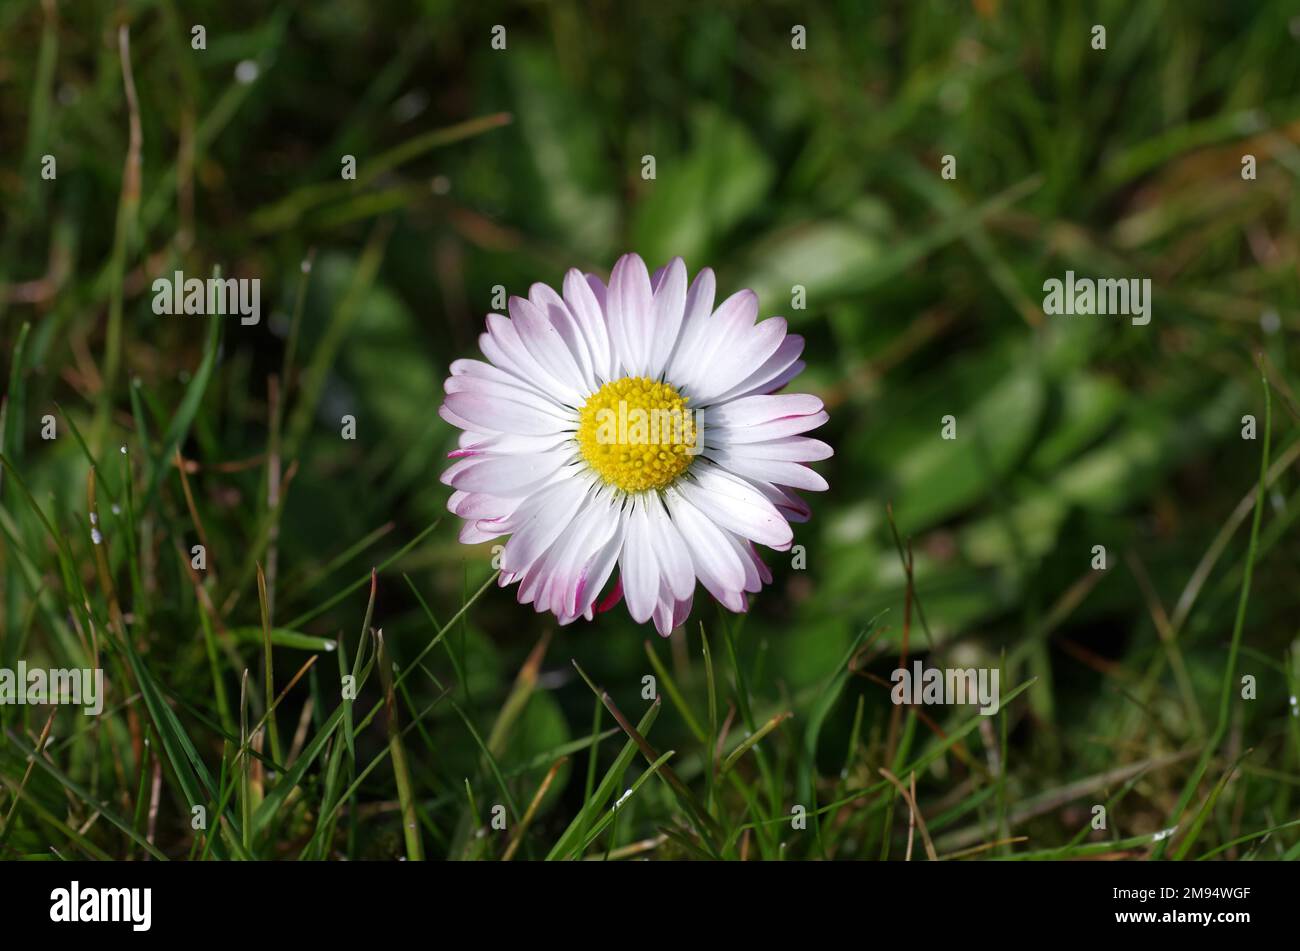 Close-up, common daisy (Bellis perennis), flower, white, single, meadow, close-up of single flower of daisy in grass Stock Photo